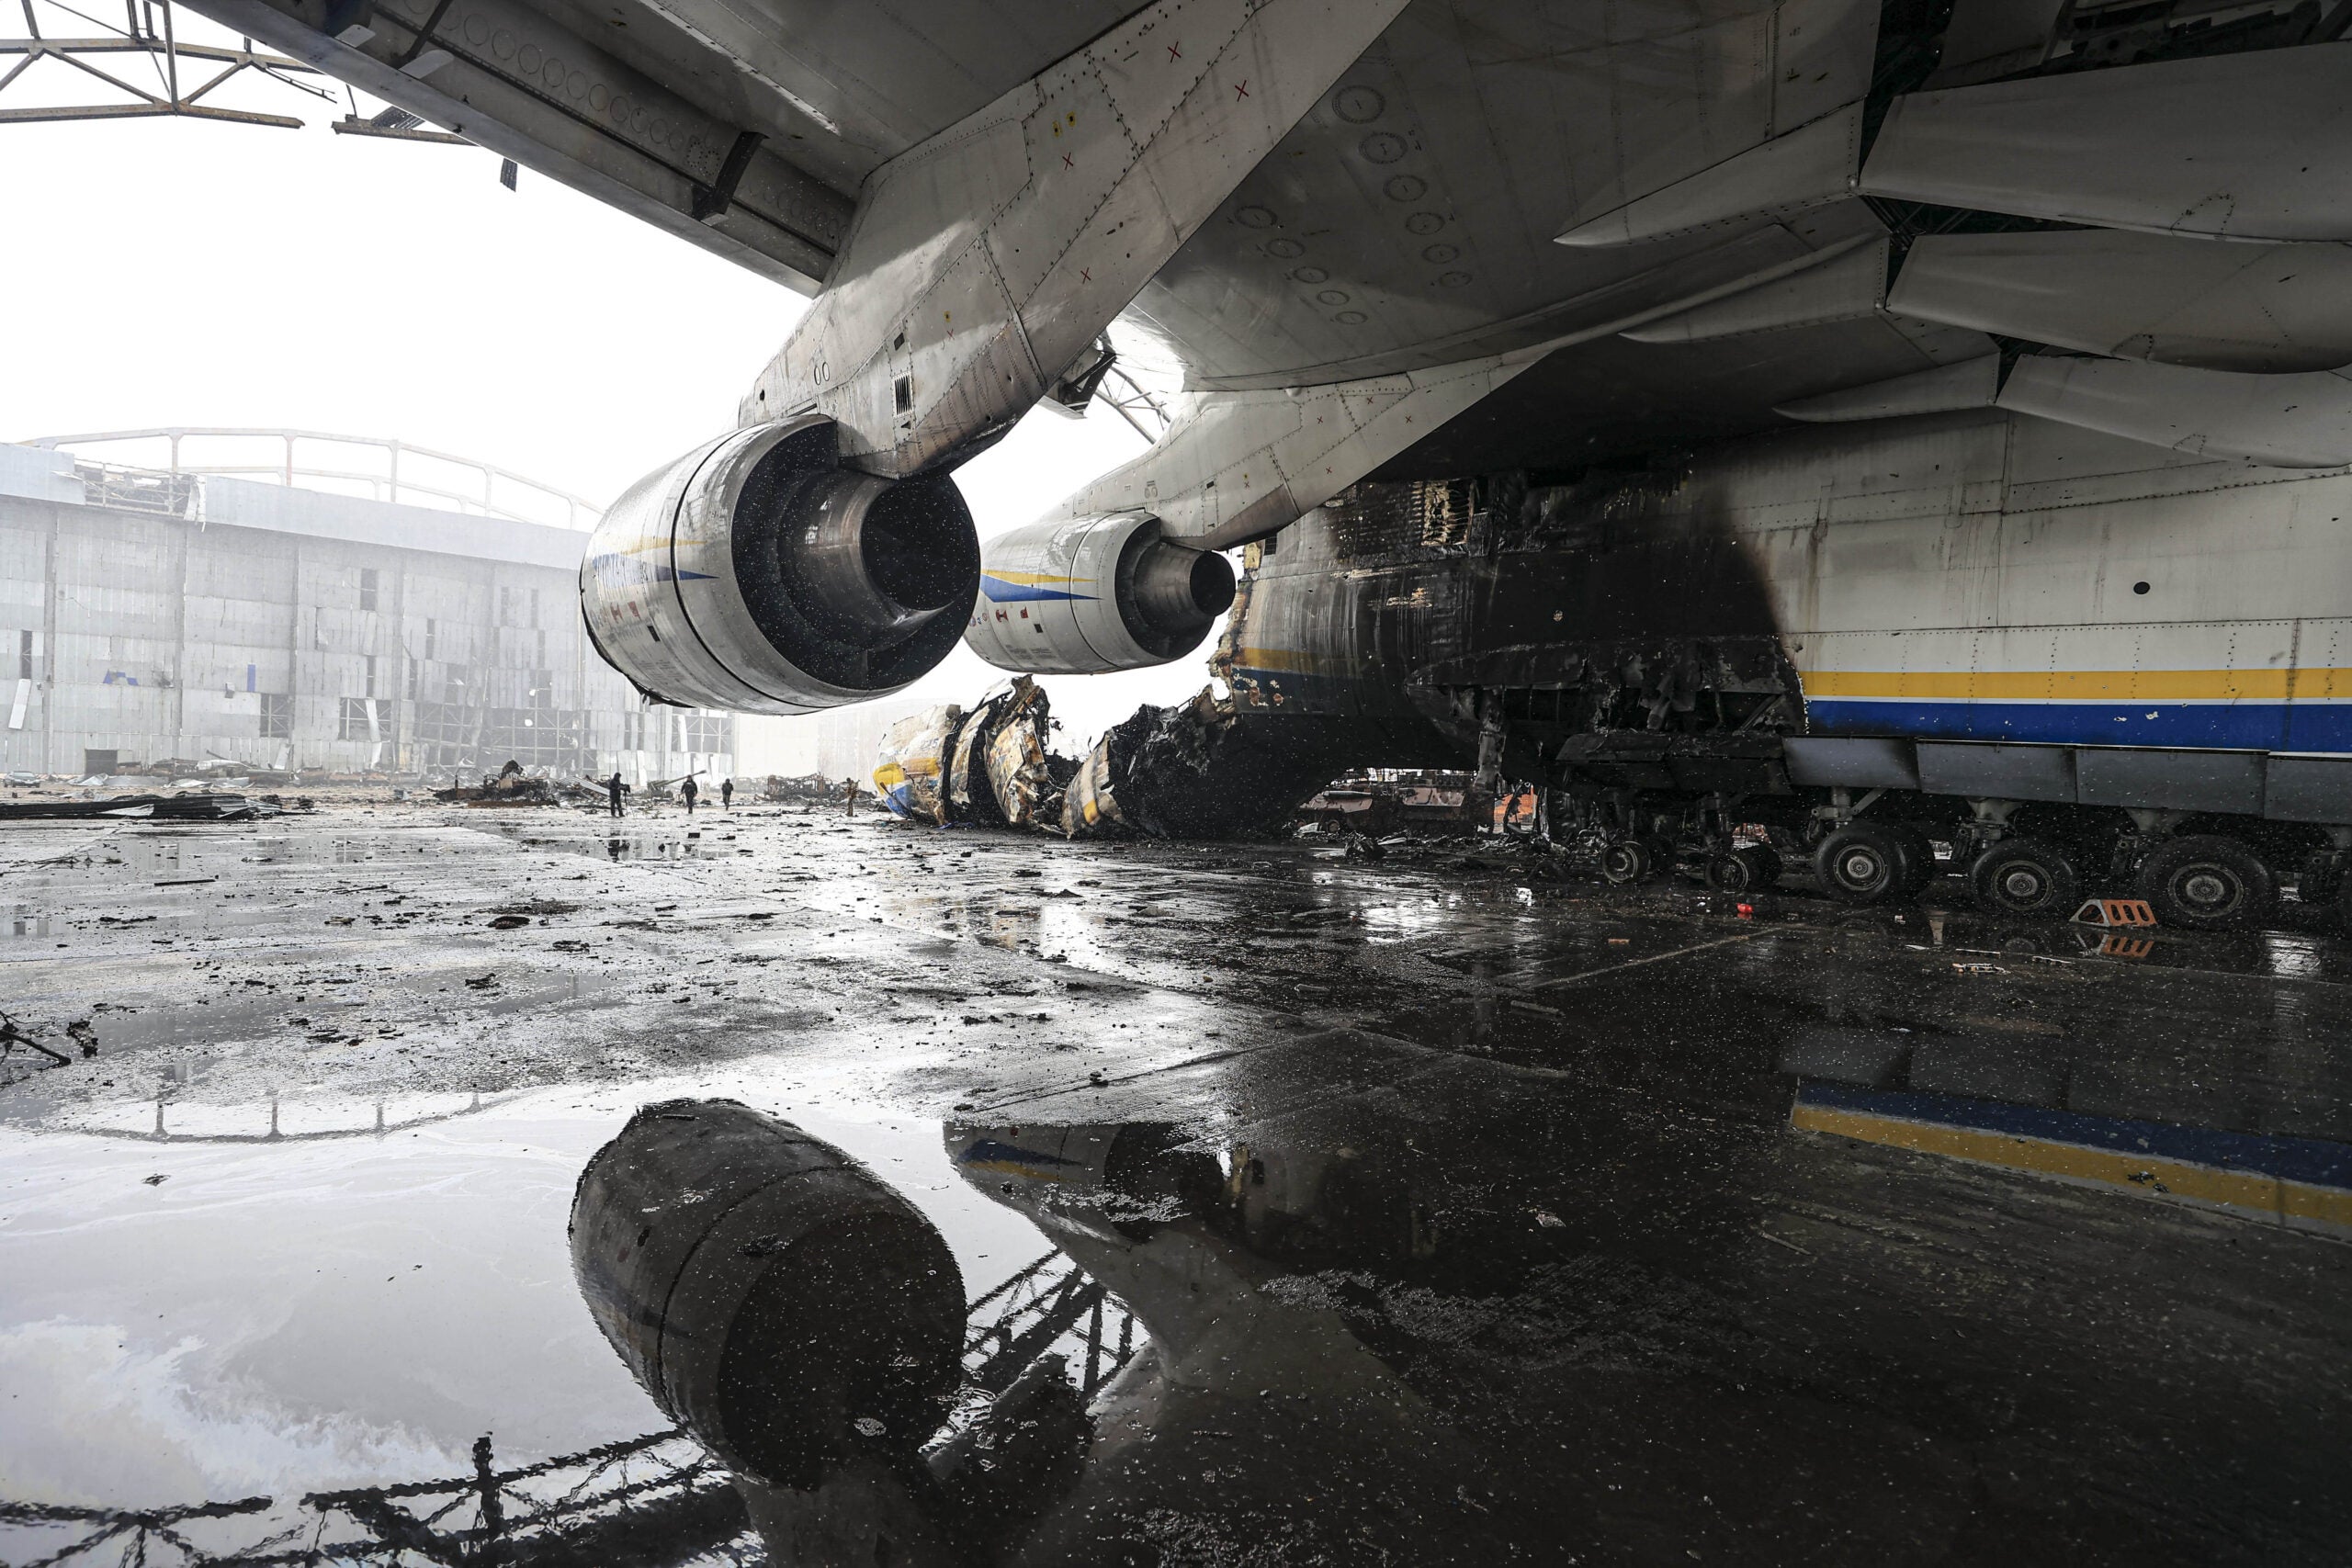 HOSTOMEL, UKRAINE - APRIL 03: A view of the wreckage of Antonov An-225 Mriya cargo plane, the world's biggest aircraft, destroyed by Russian shelling as Russia's attack on Ukraine continues, at an airshed in Hostomel, Ukraine on April 03, 2022. The wreckage of the world's largest cargo plane Antonov An-225, which was severely damaged and rendered unusable due to Russian bombardments, was viewed by Anadolu Agency. (Photo by Metin Aktas/Anadolu Agency via Getty Images)